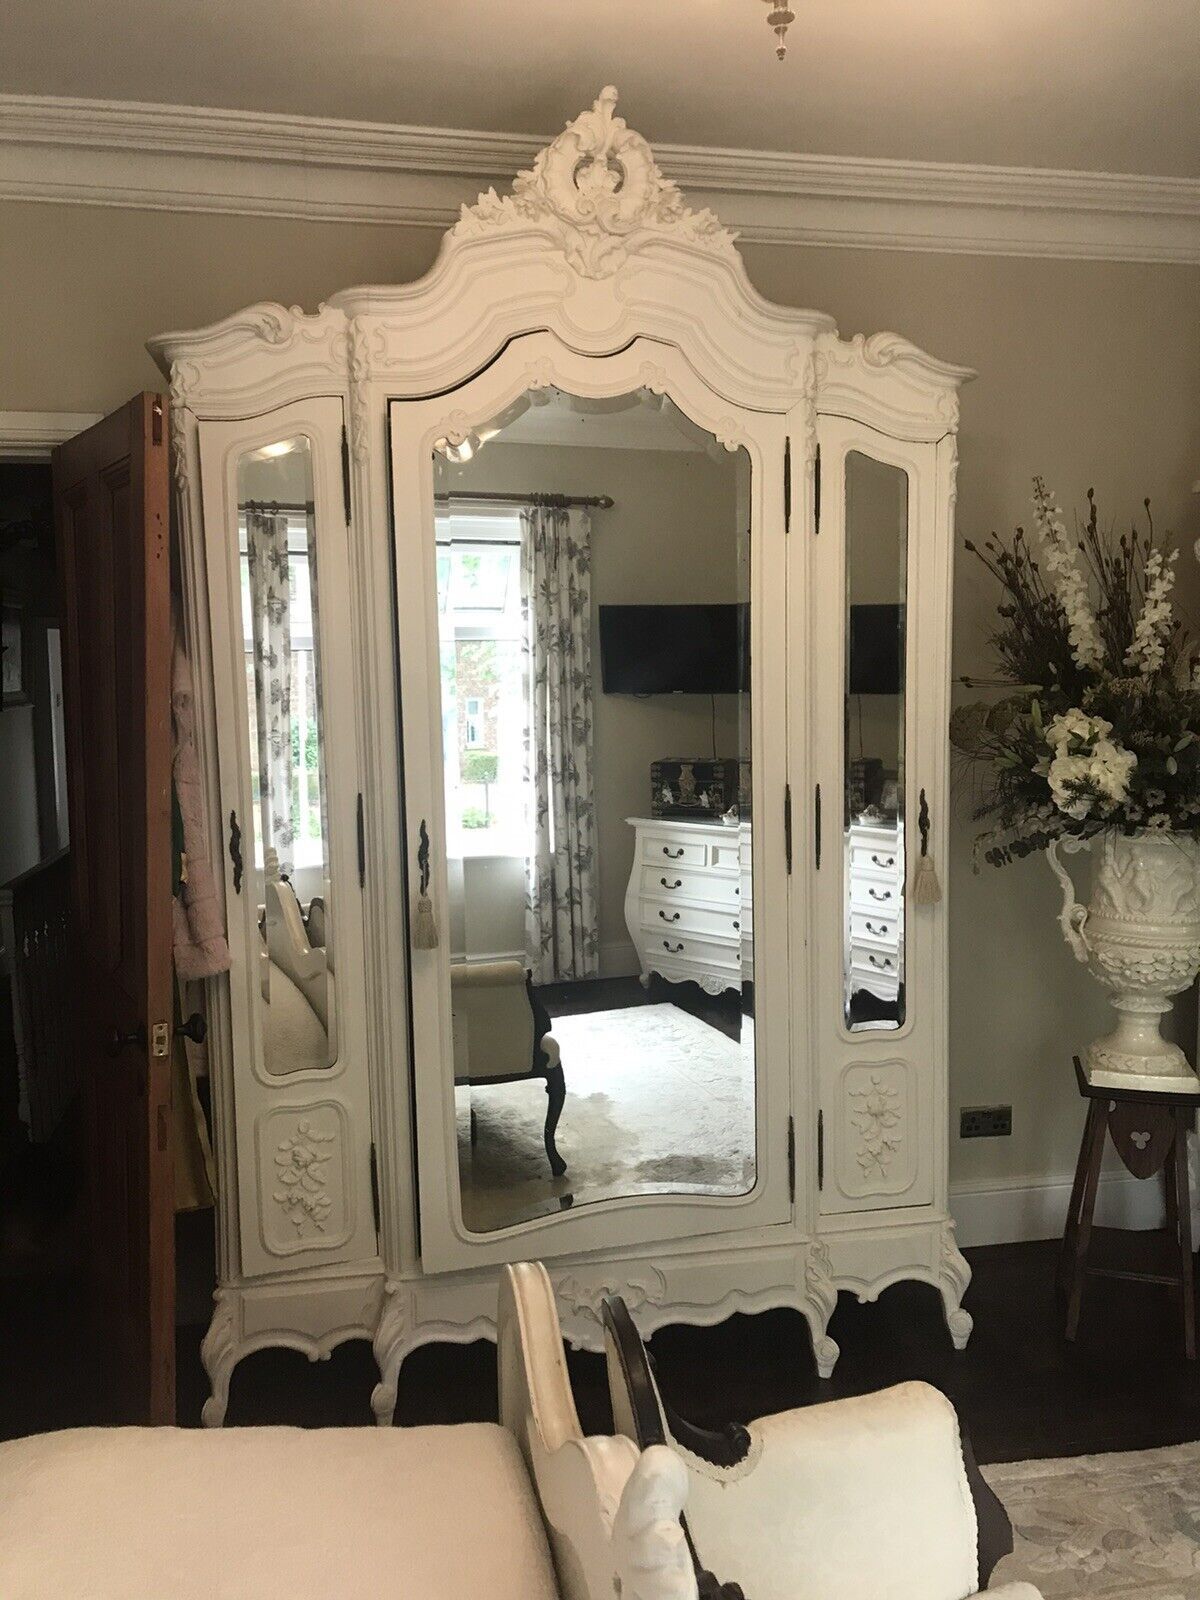 Antique Large French Louis Style Armoire Wardrobe With 3 Mirrored Doors |  Ebay Inside French Armoires Wardrobes (View 11 of 15)